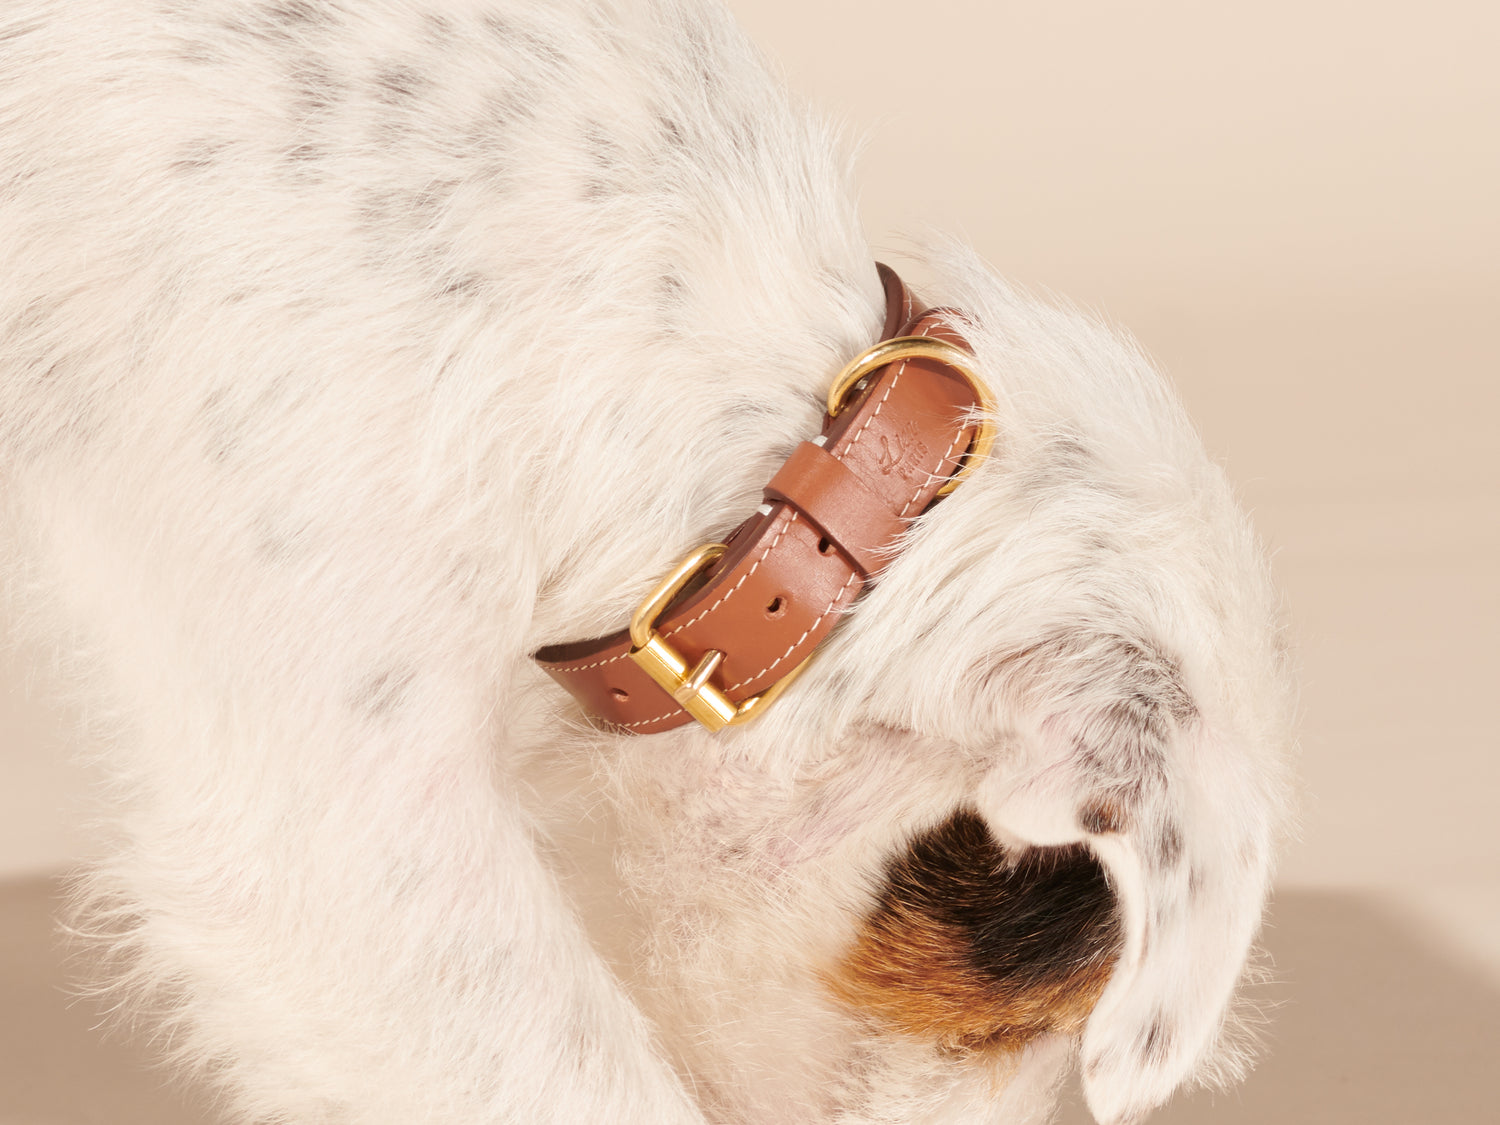 Products By Louis Vuitton : Baxter Xsmall Dog Collar